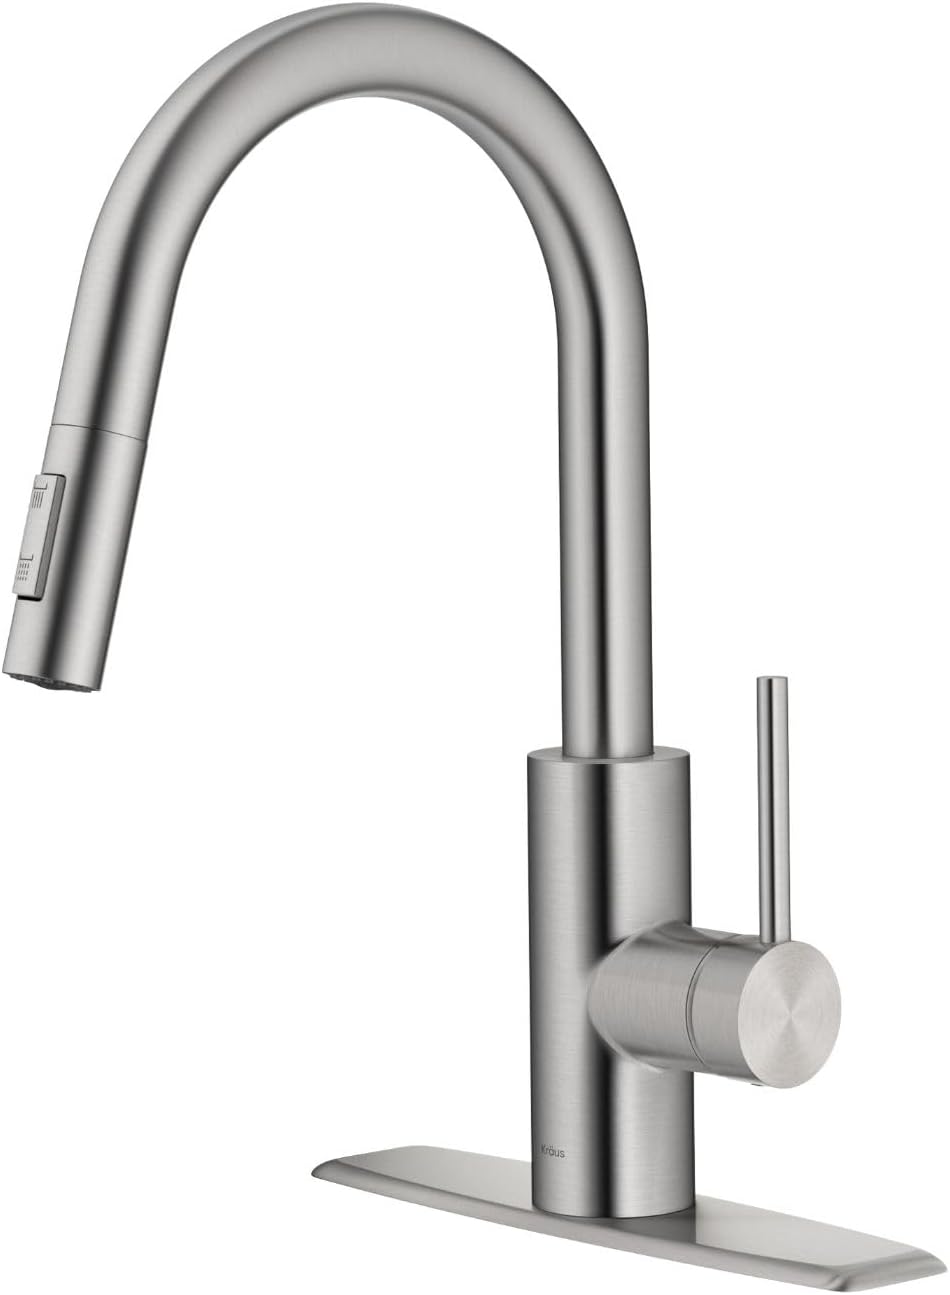 KRAUS Oletto Spot Free Stainless Steel Finish Dual Function Pull-Down Kitchen Faucet, KPF-2620SFS, 15 1/8 inch